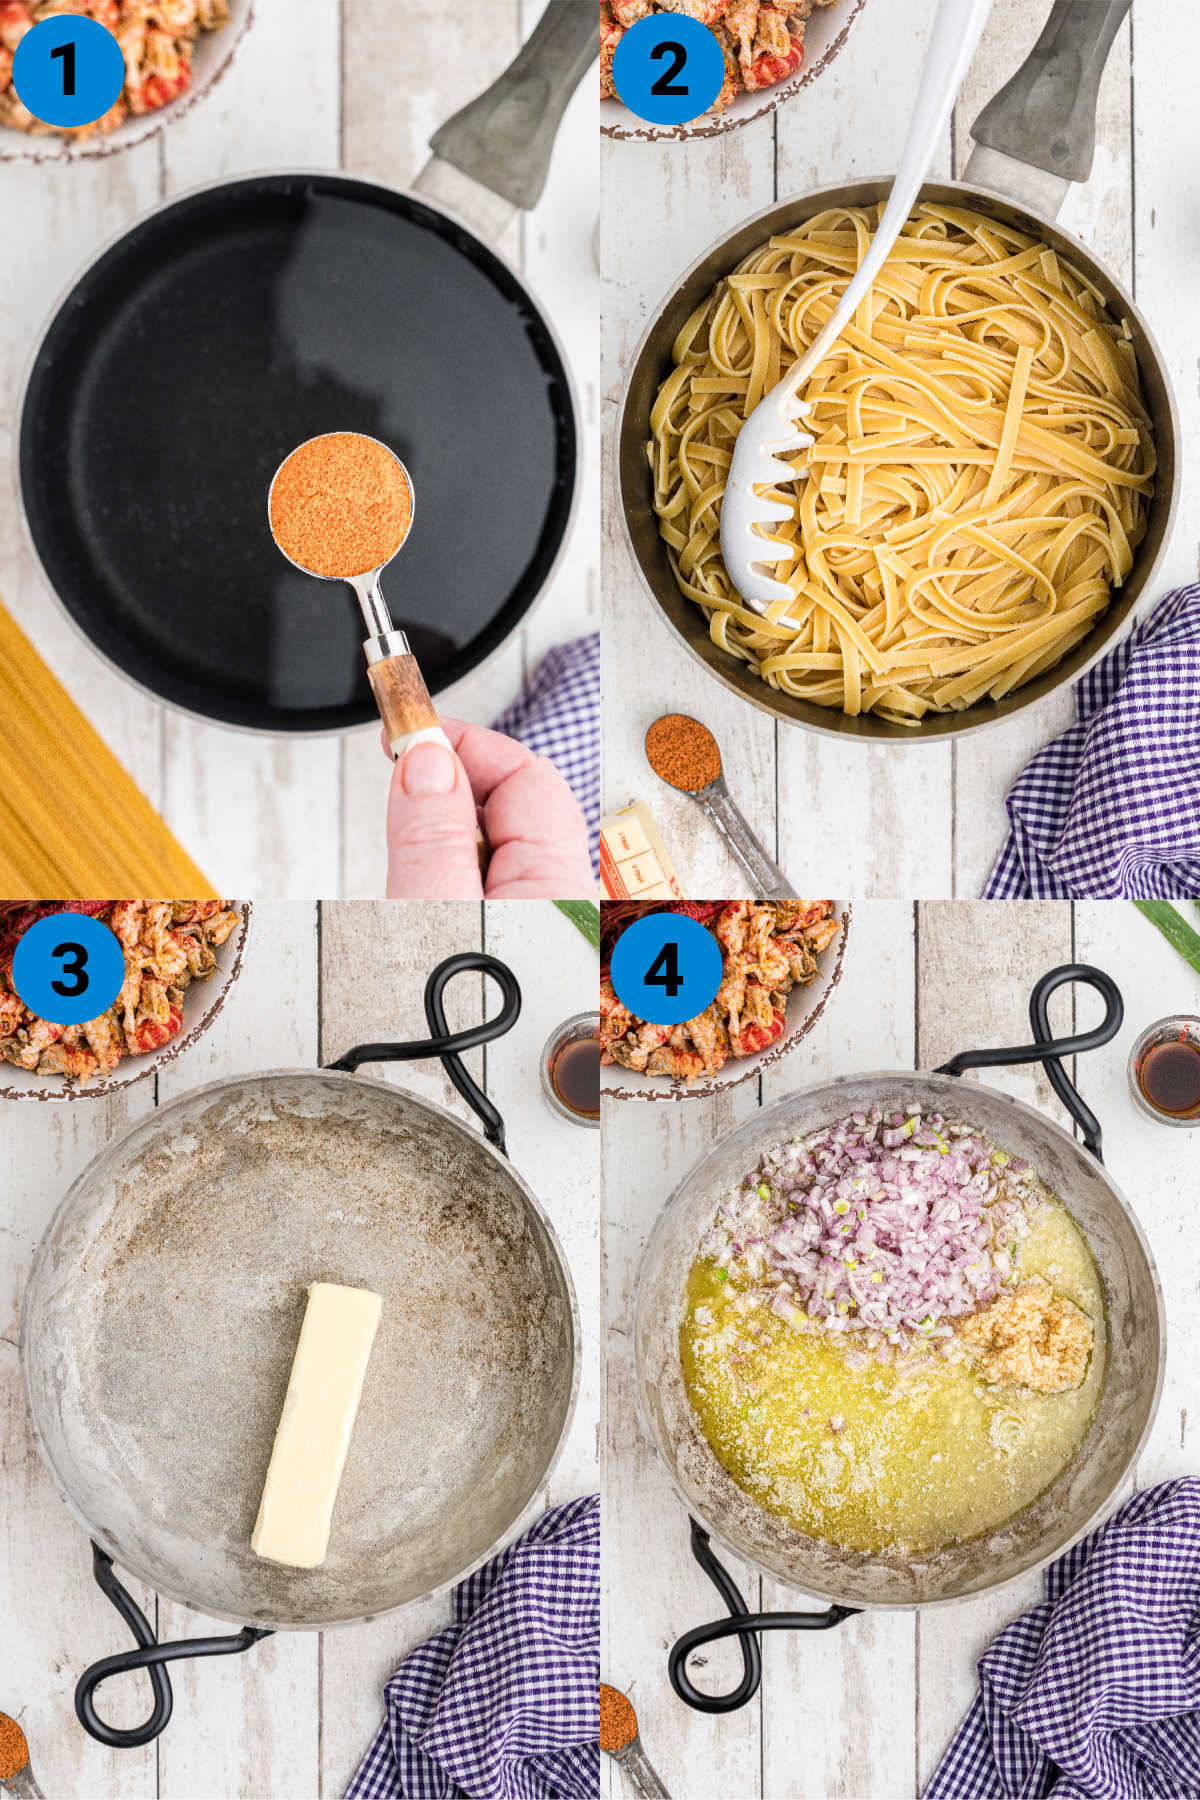 four images showing how to make a crawfish fettuccine with the different steps 1-4 and ingredients